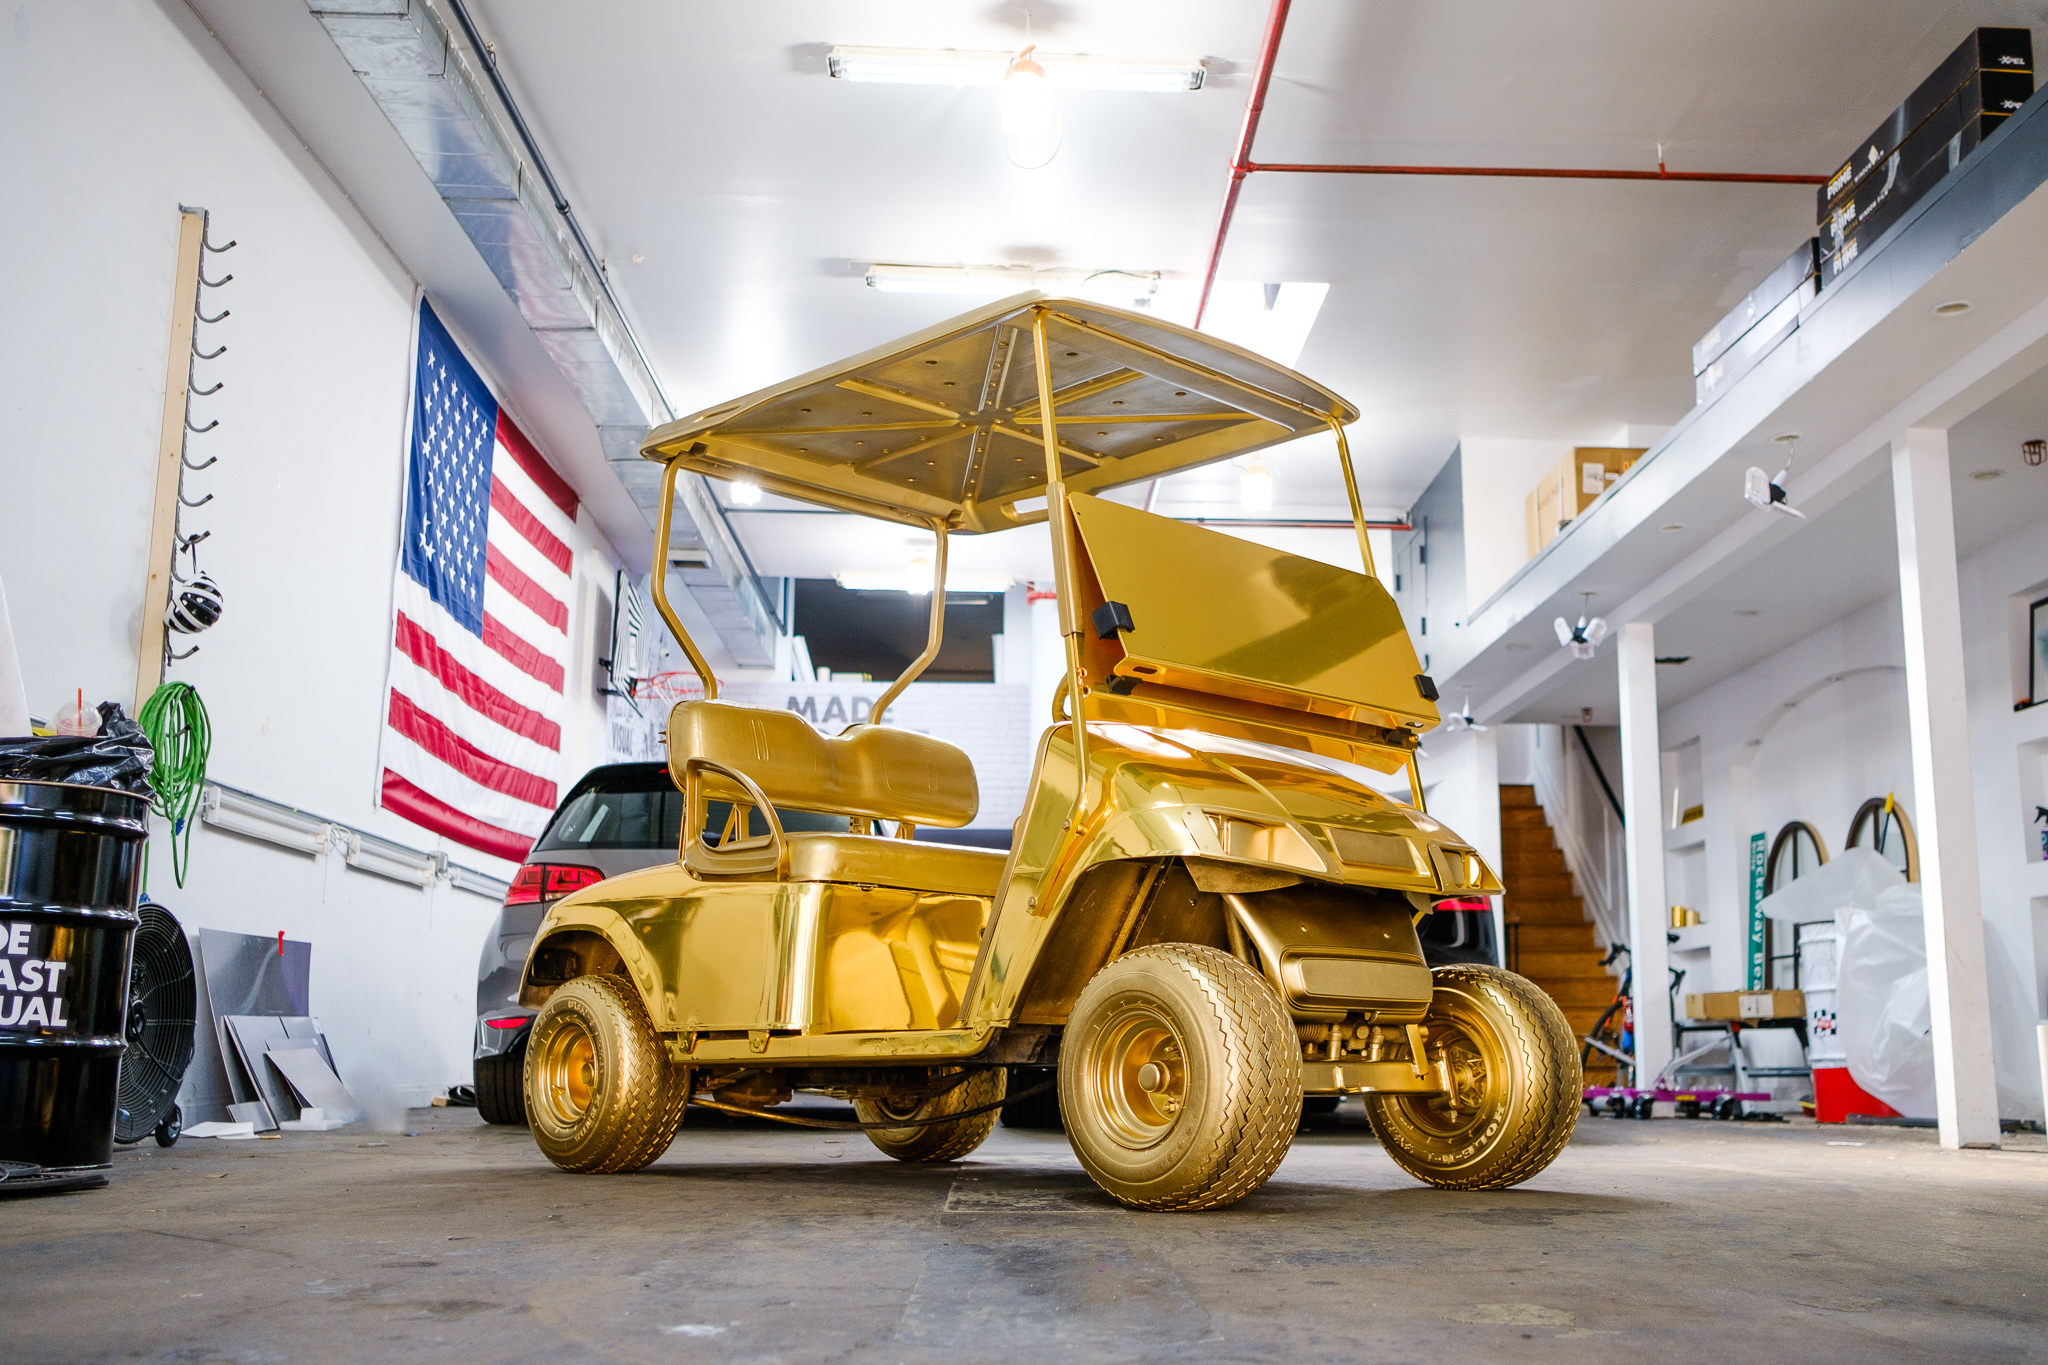 Featured image for “Gold Cart”